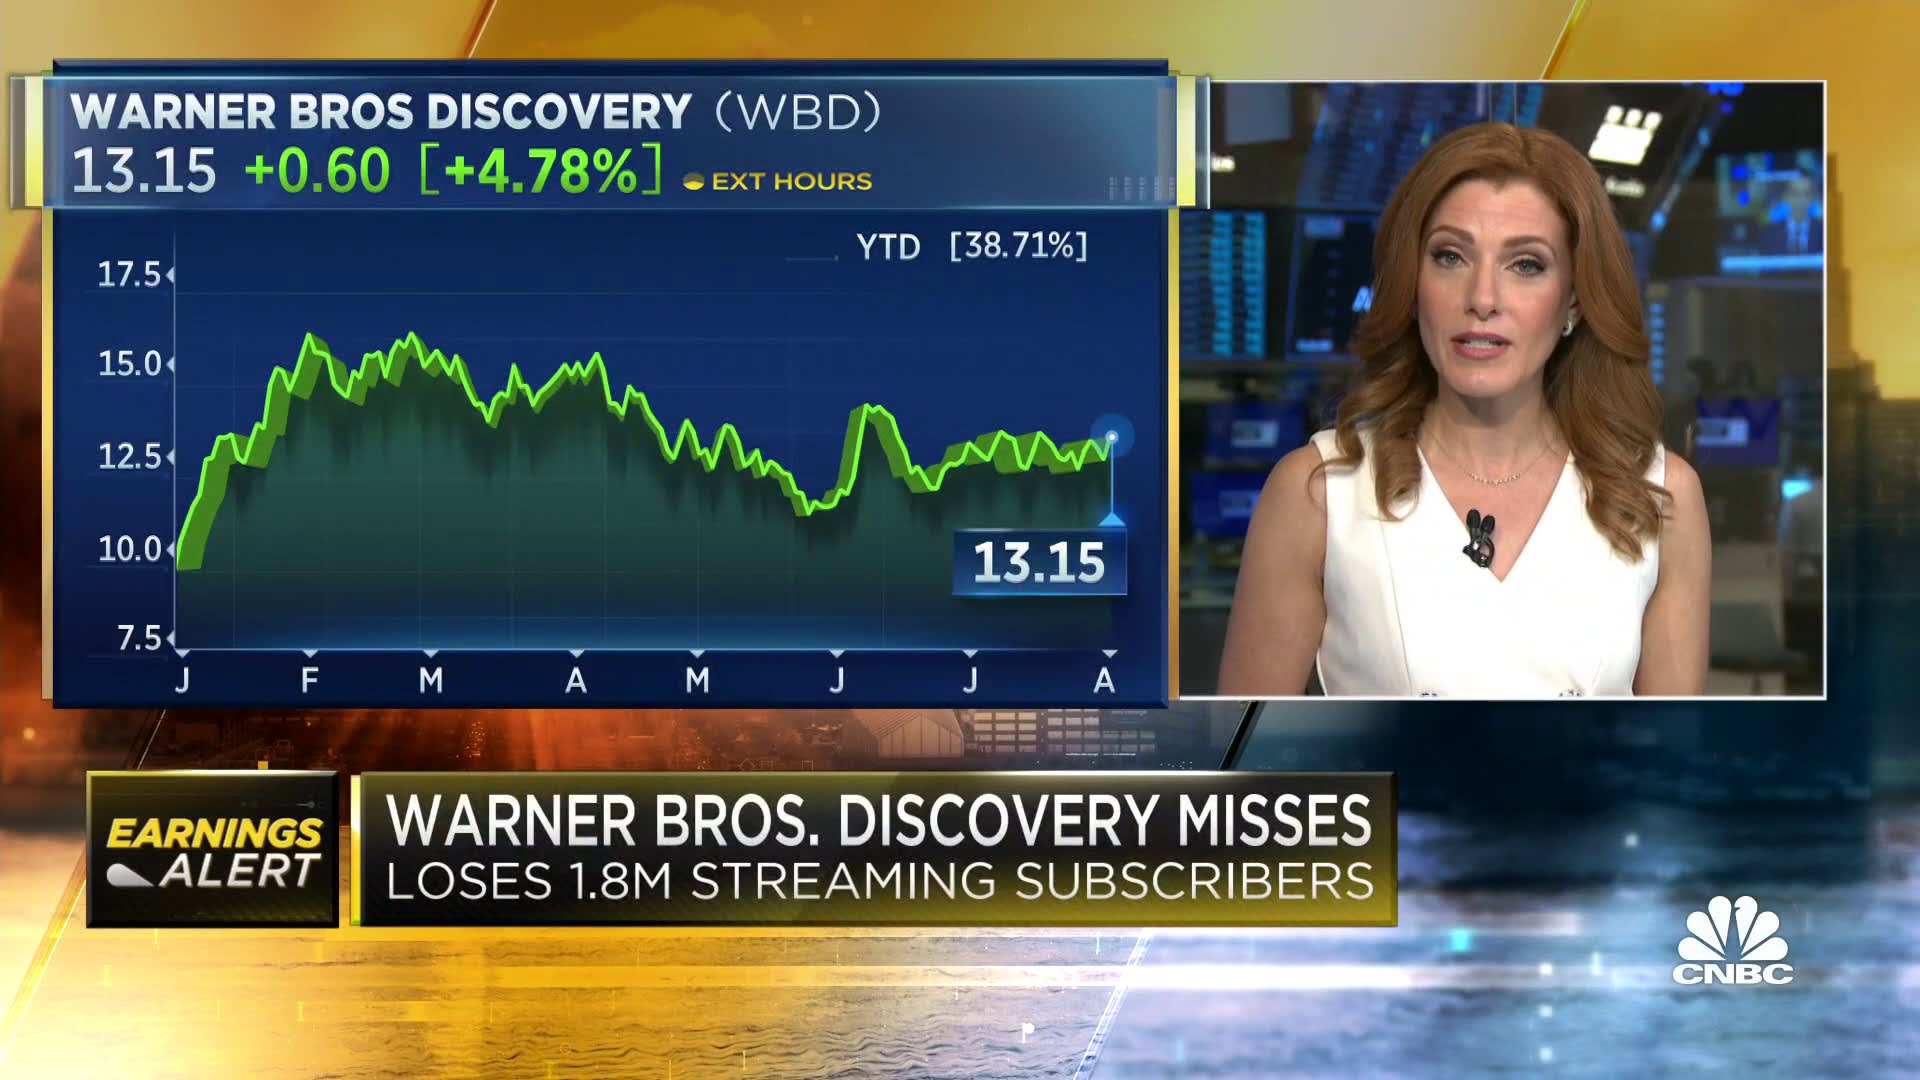 Warner Bros. Discovery loses subscribers after Max launch, but shares rise on debt paydown